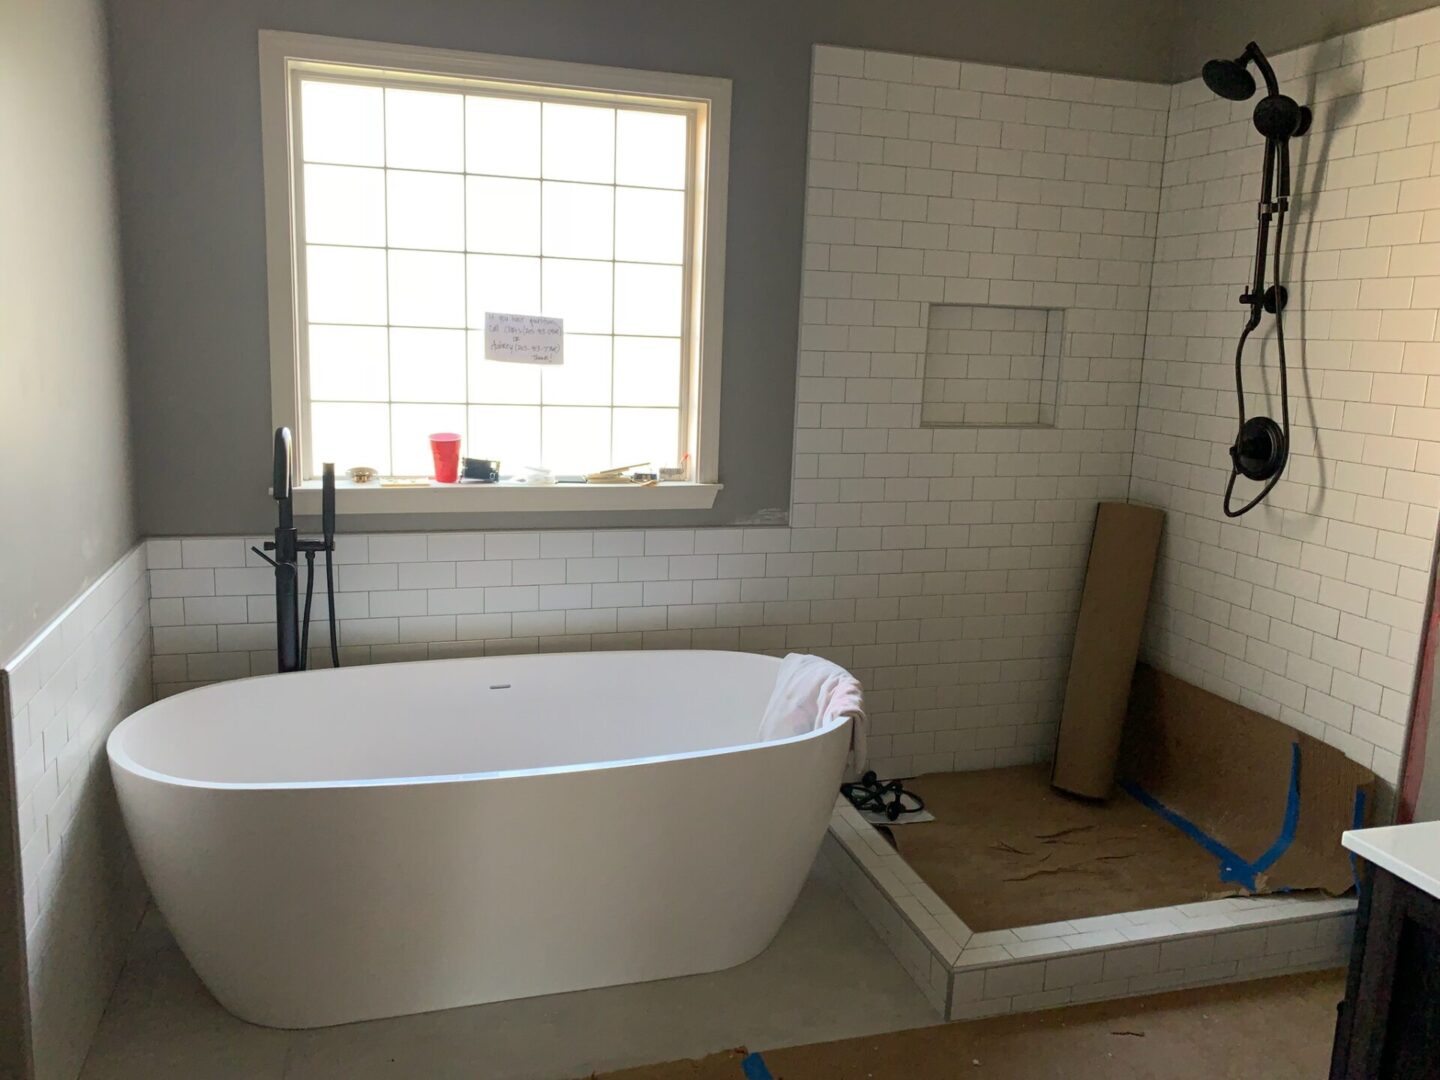 Grey-walled bathroom with half-wall tiling for a bathtub space and full-wall tiling for a shower space